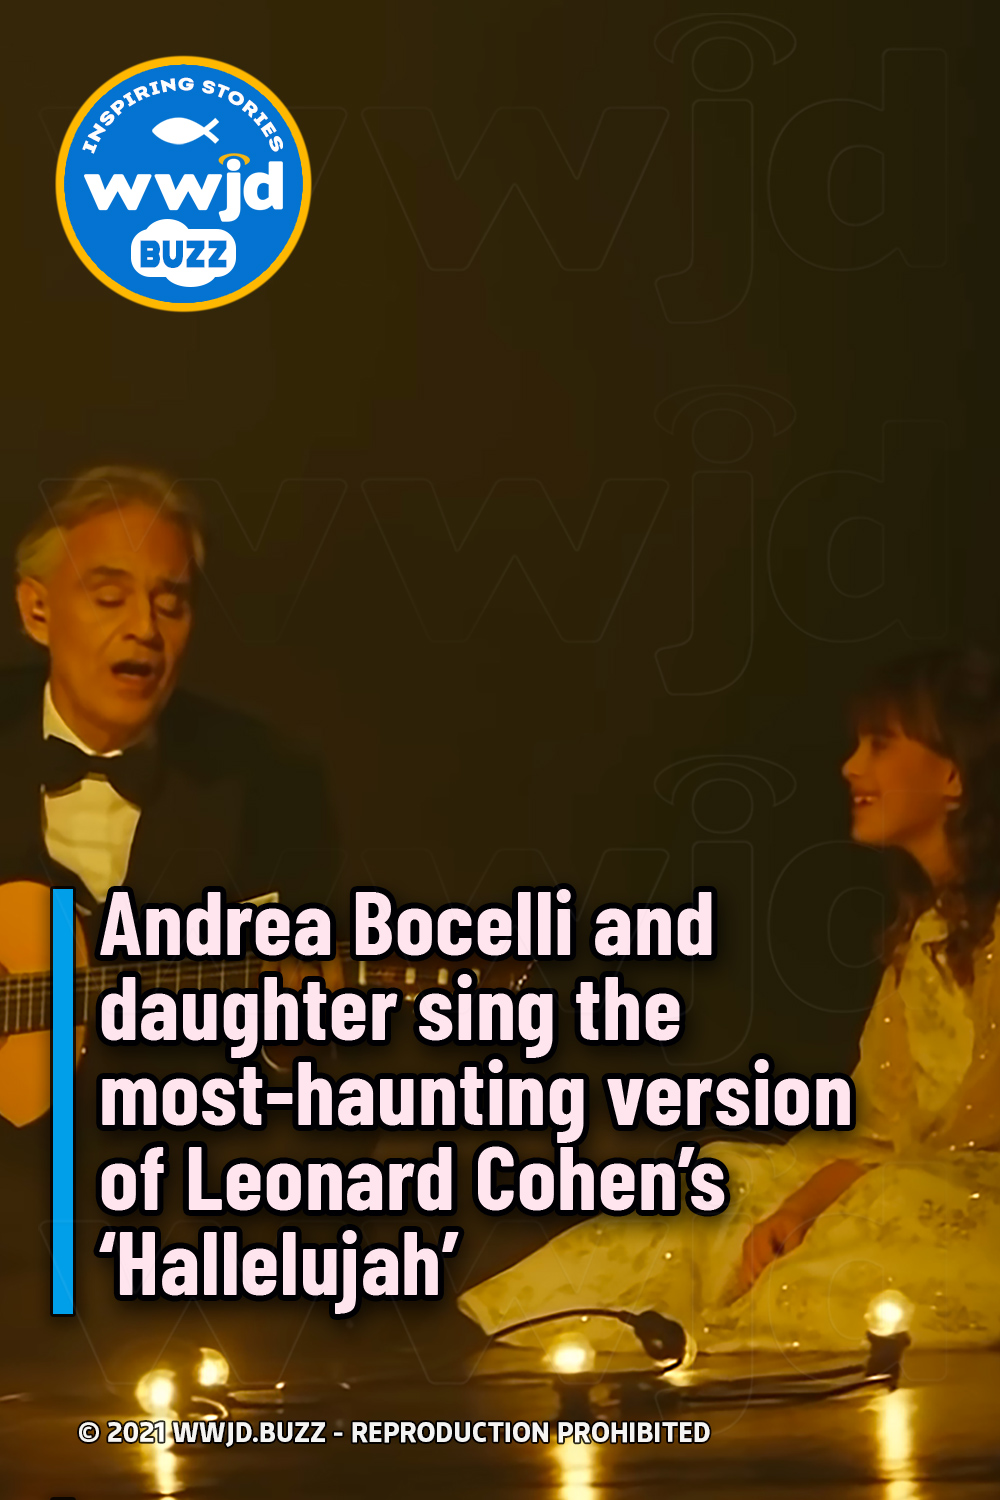 Andrea Bocelli and daughter sing the most-haunting version of Leonard Cohen’s ‘Hallelujah’